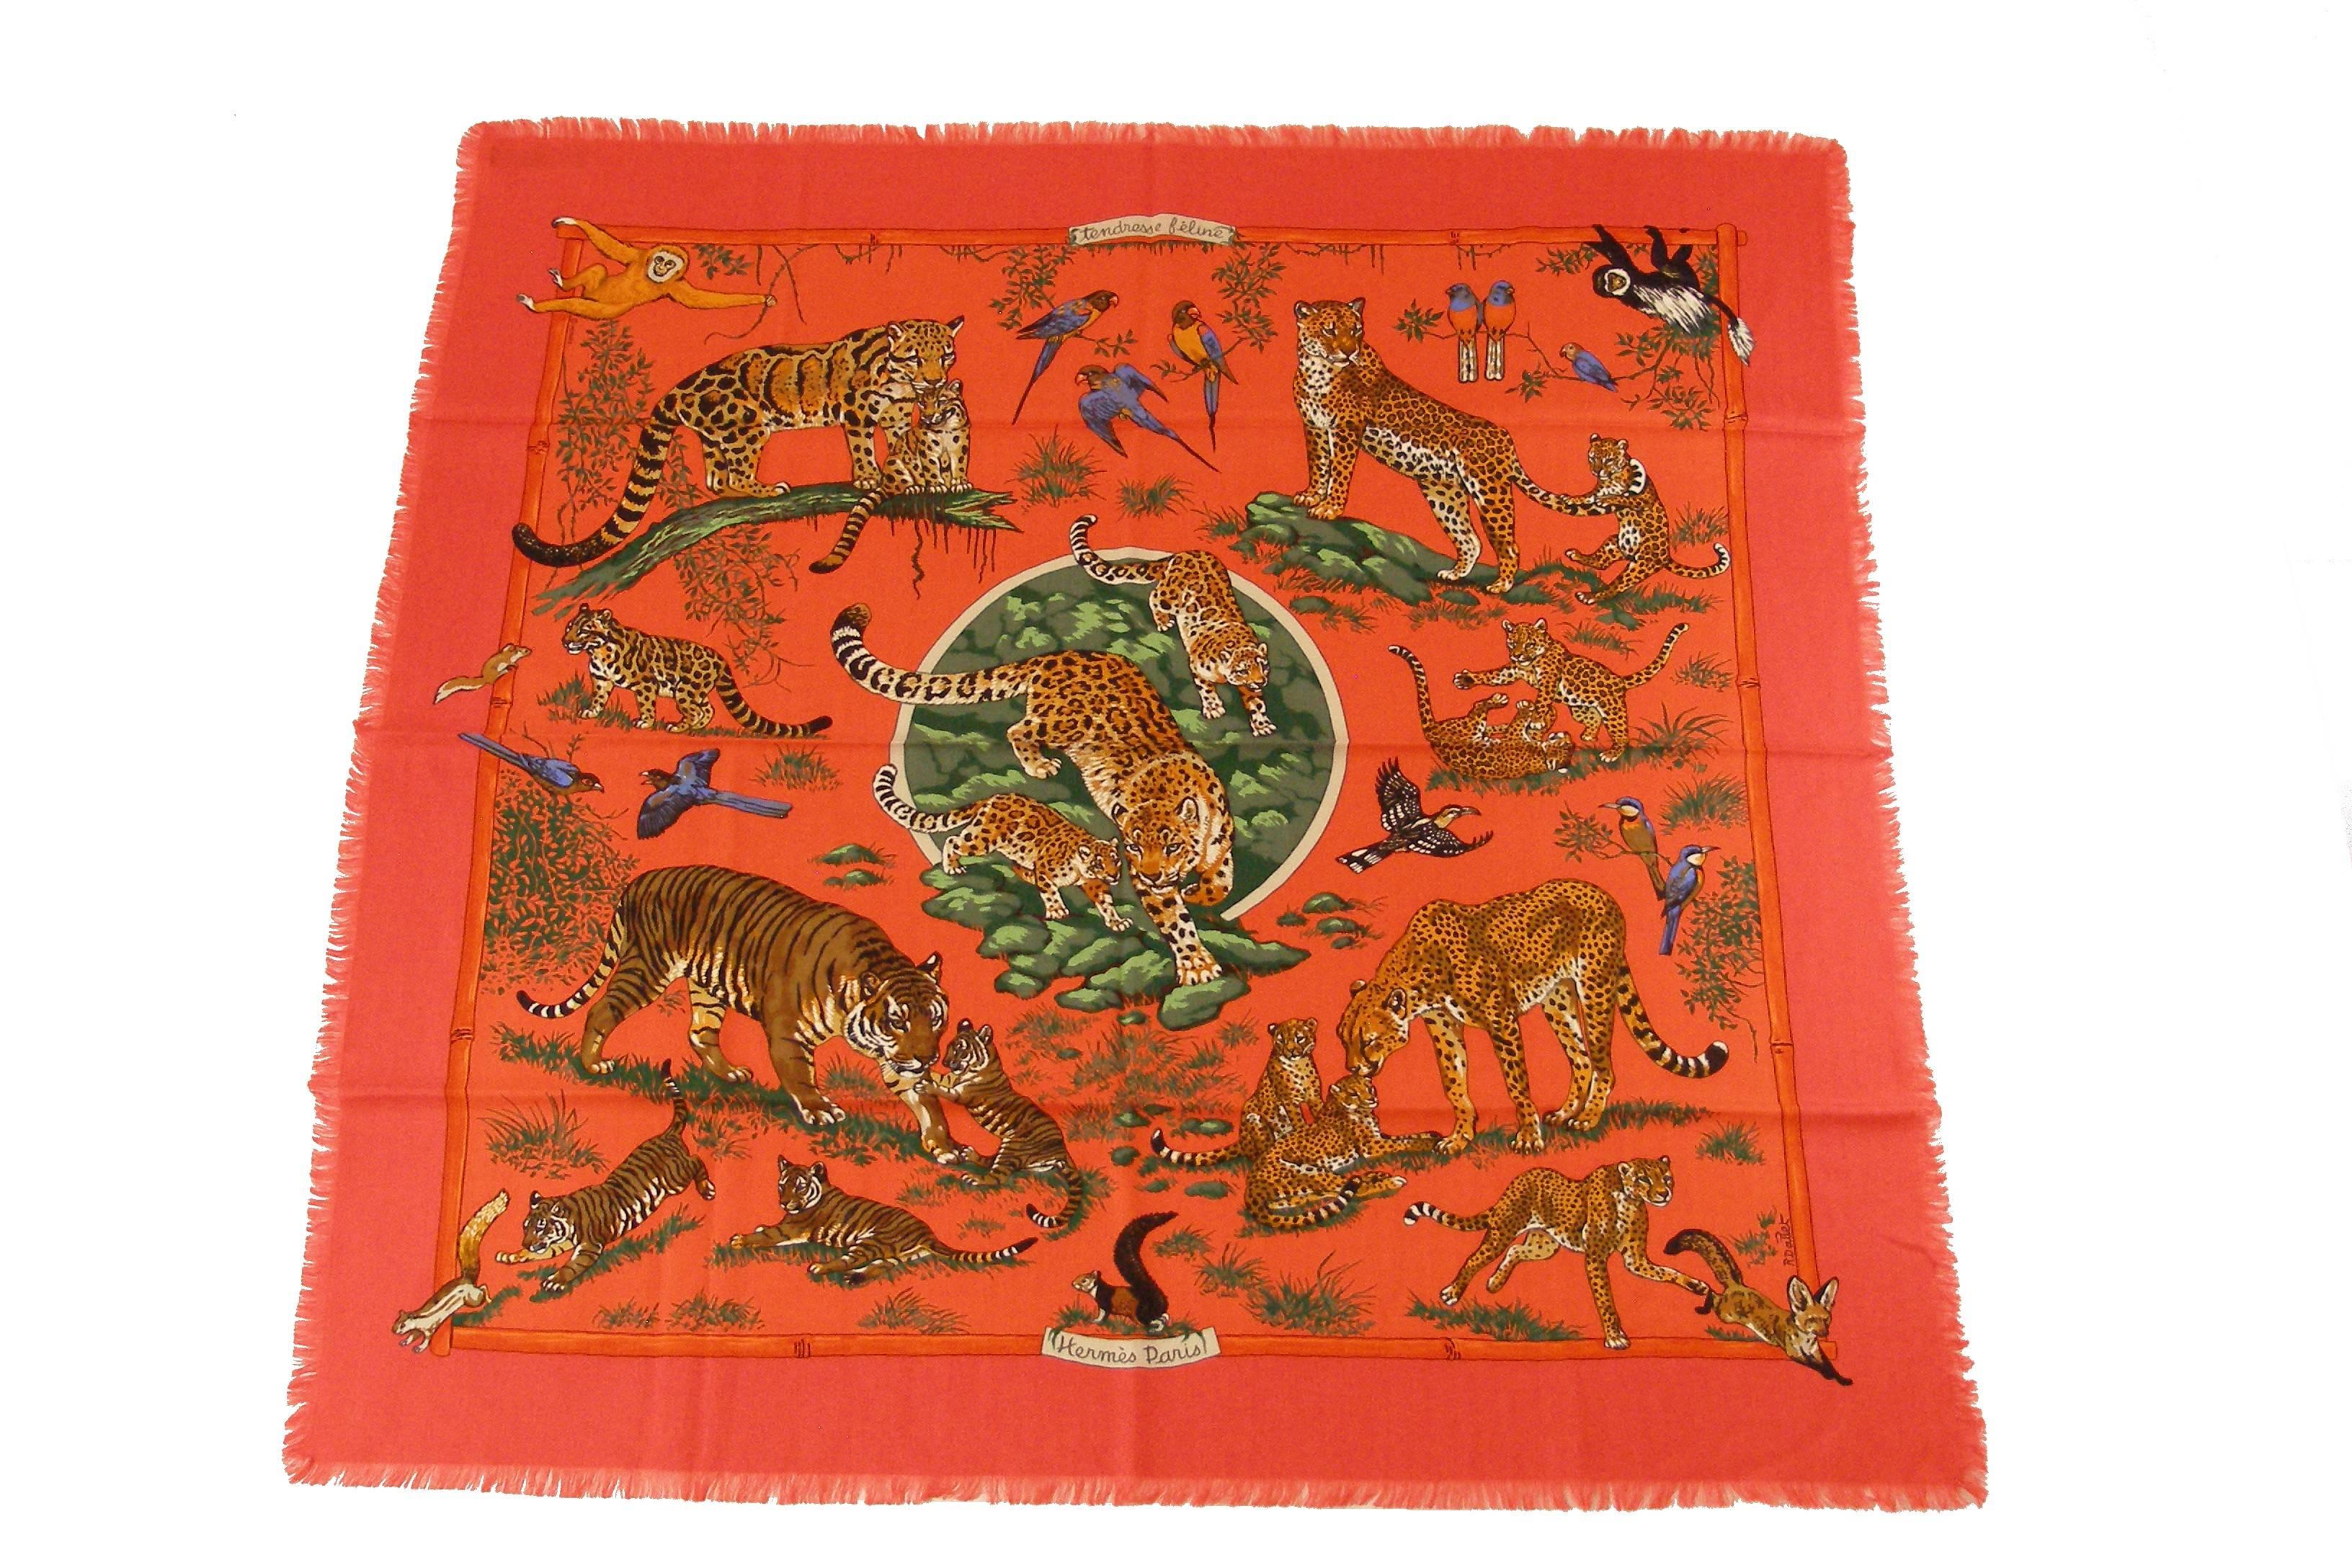 Marvelous luxurious scarf MADE IN FRANCE by HERMES designed by Robert Dallet 
Smooth, delicate lovely!
Signature : Hermès - Paris, © Hermes by R Dallet
Composition : 65% Cashmere, 35% Silk, fringe edges
Care tag : Yes 
Multicolor ORANGE 
Dimension :